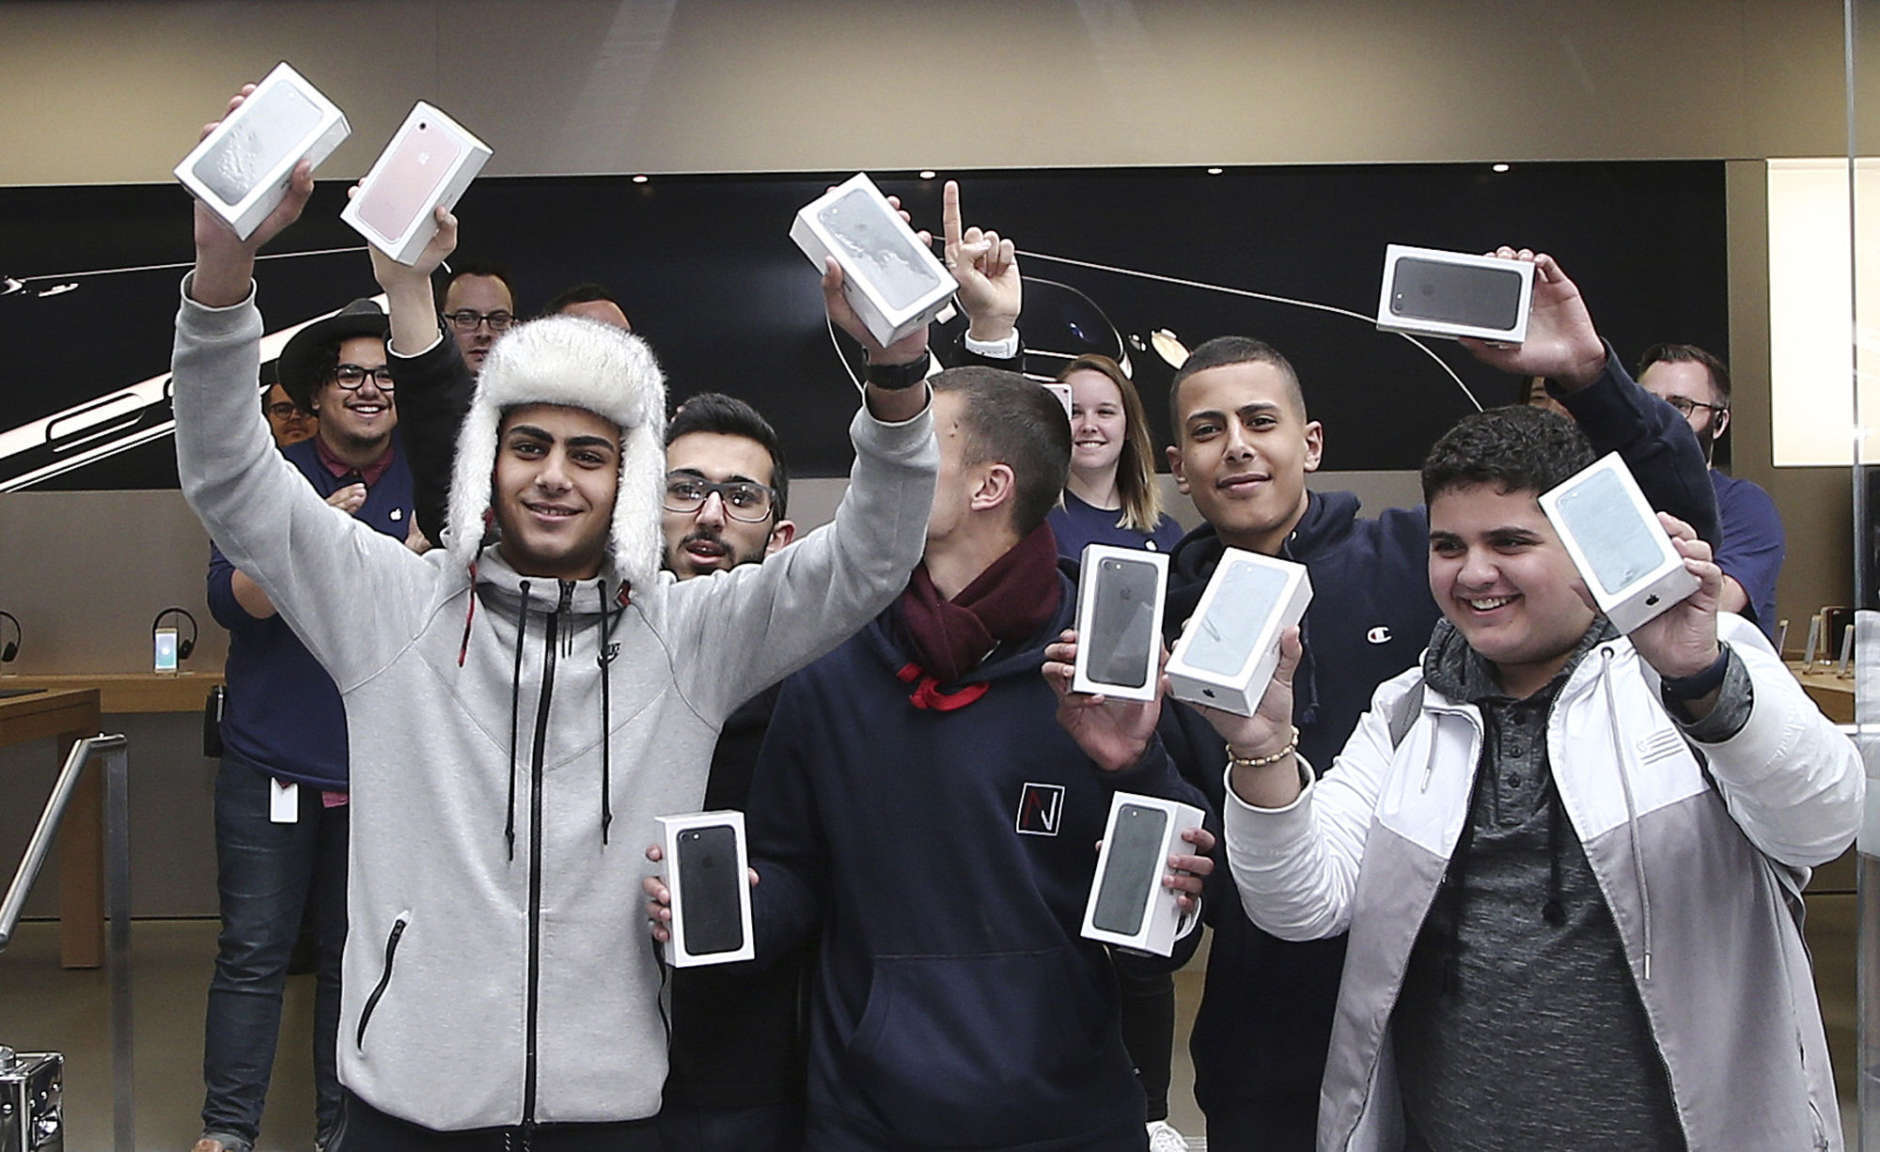 happy people with iphones